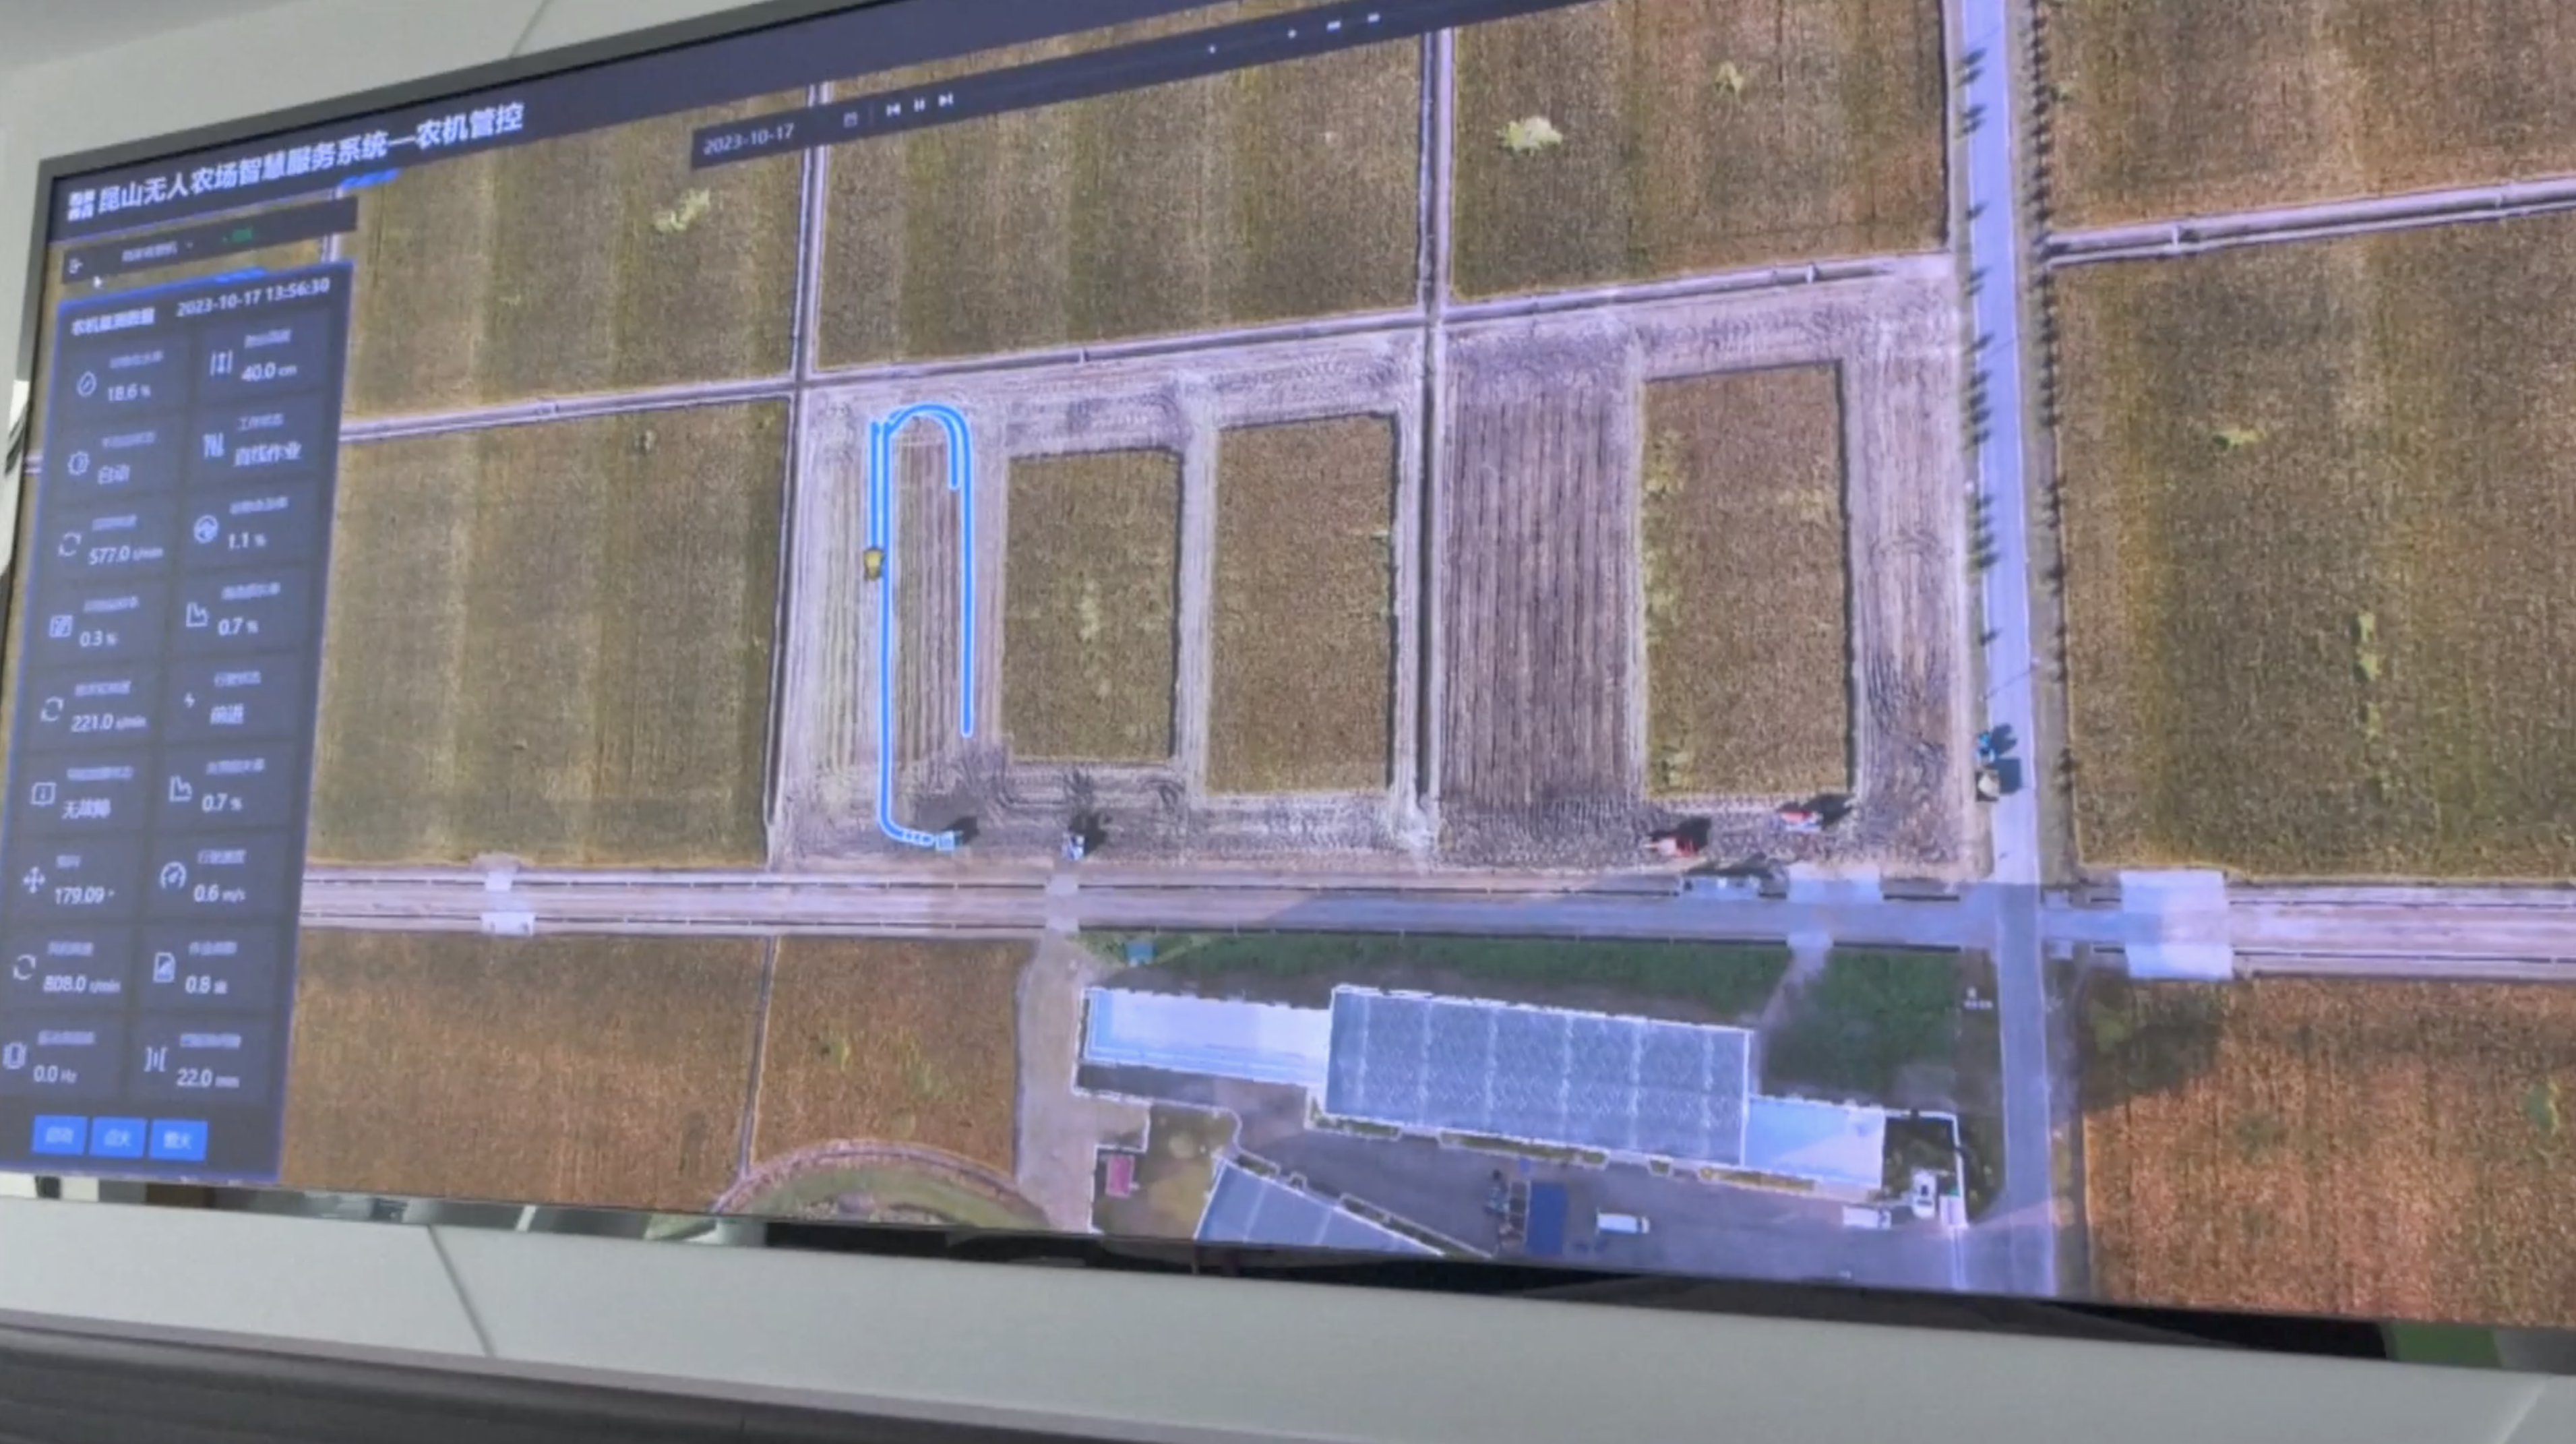 Unmanned farm intelligent service system shows the image of the whole farmland at a farm in Kunshan City, Jiangsu Province. /China Media Group